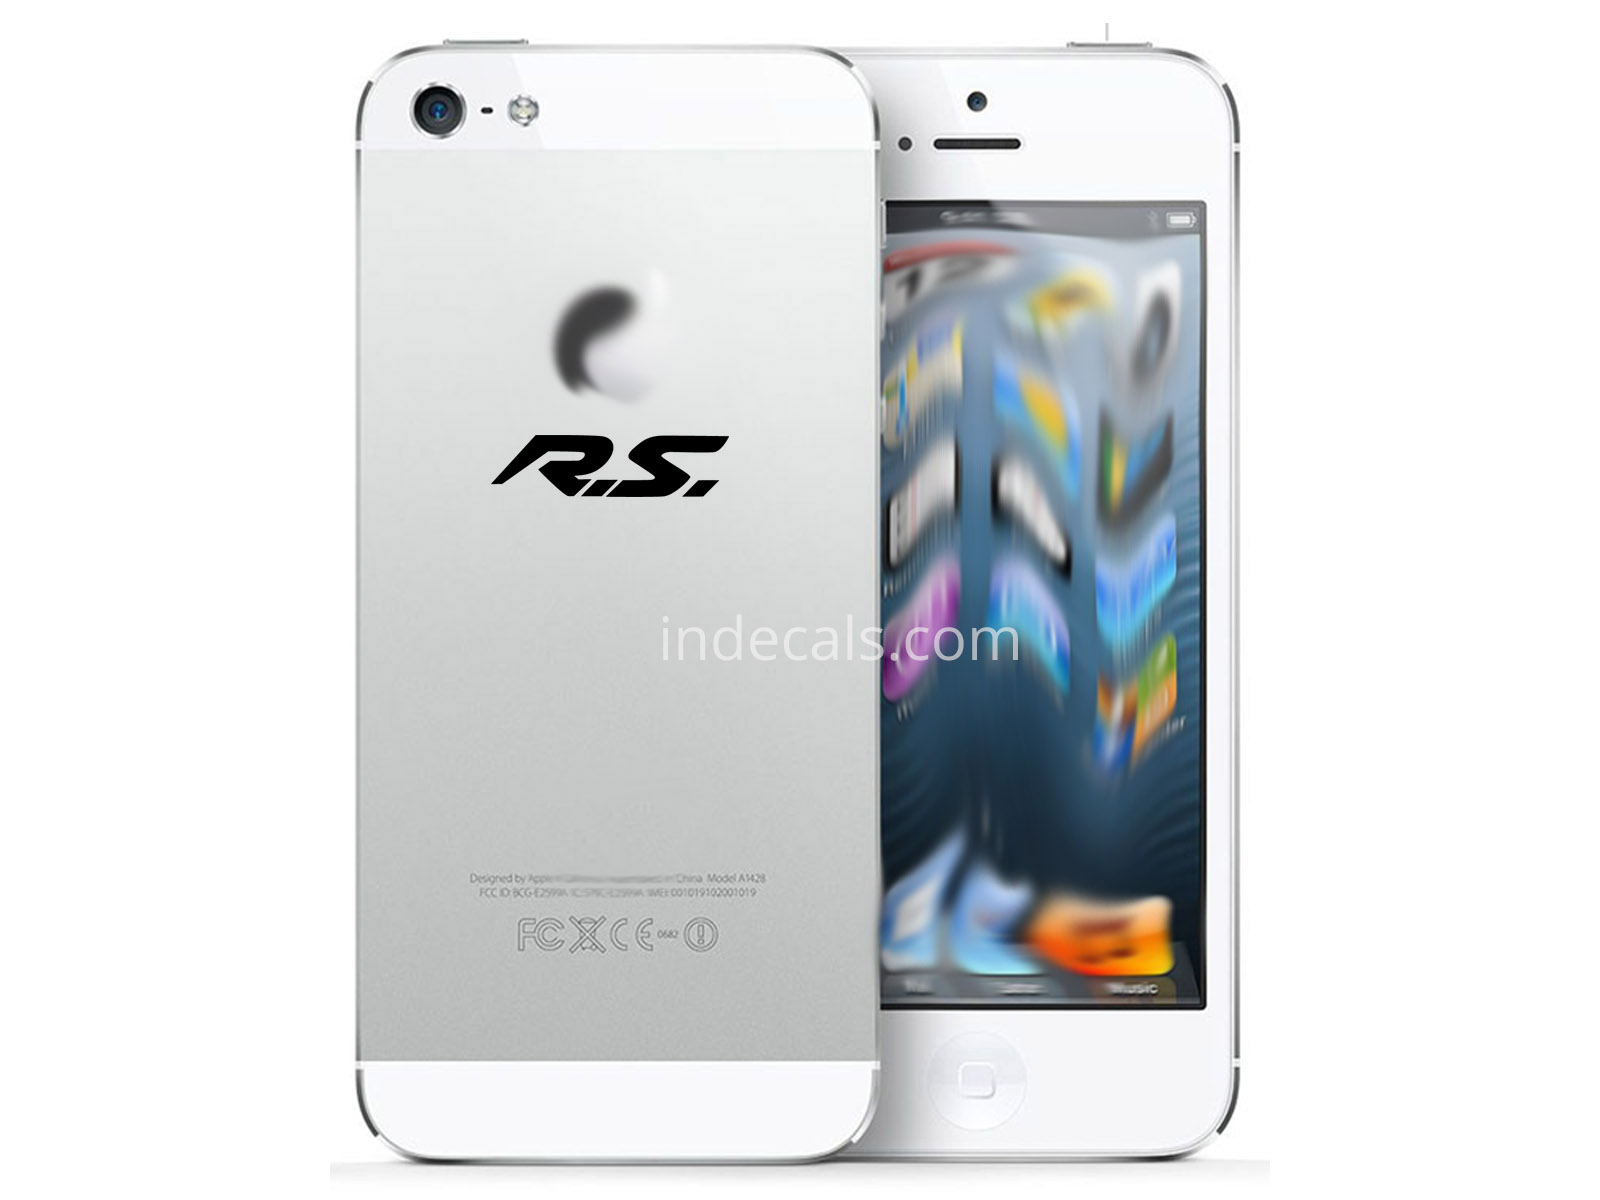 3 x Renault RS Stickers for Smartphone - Black